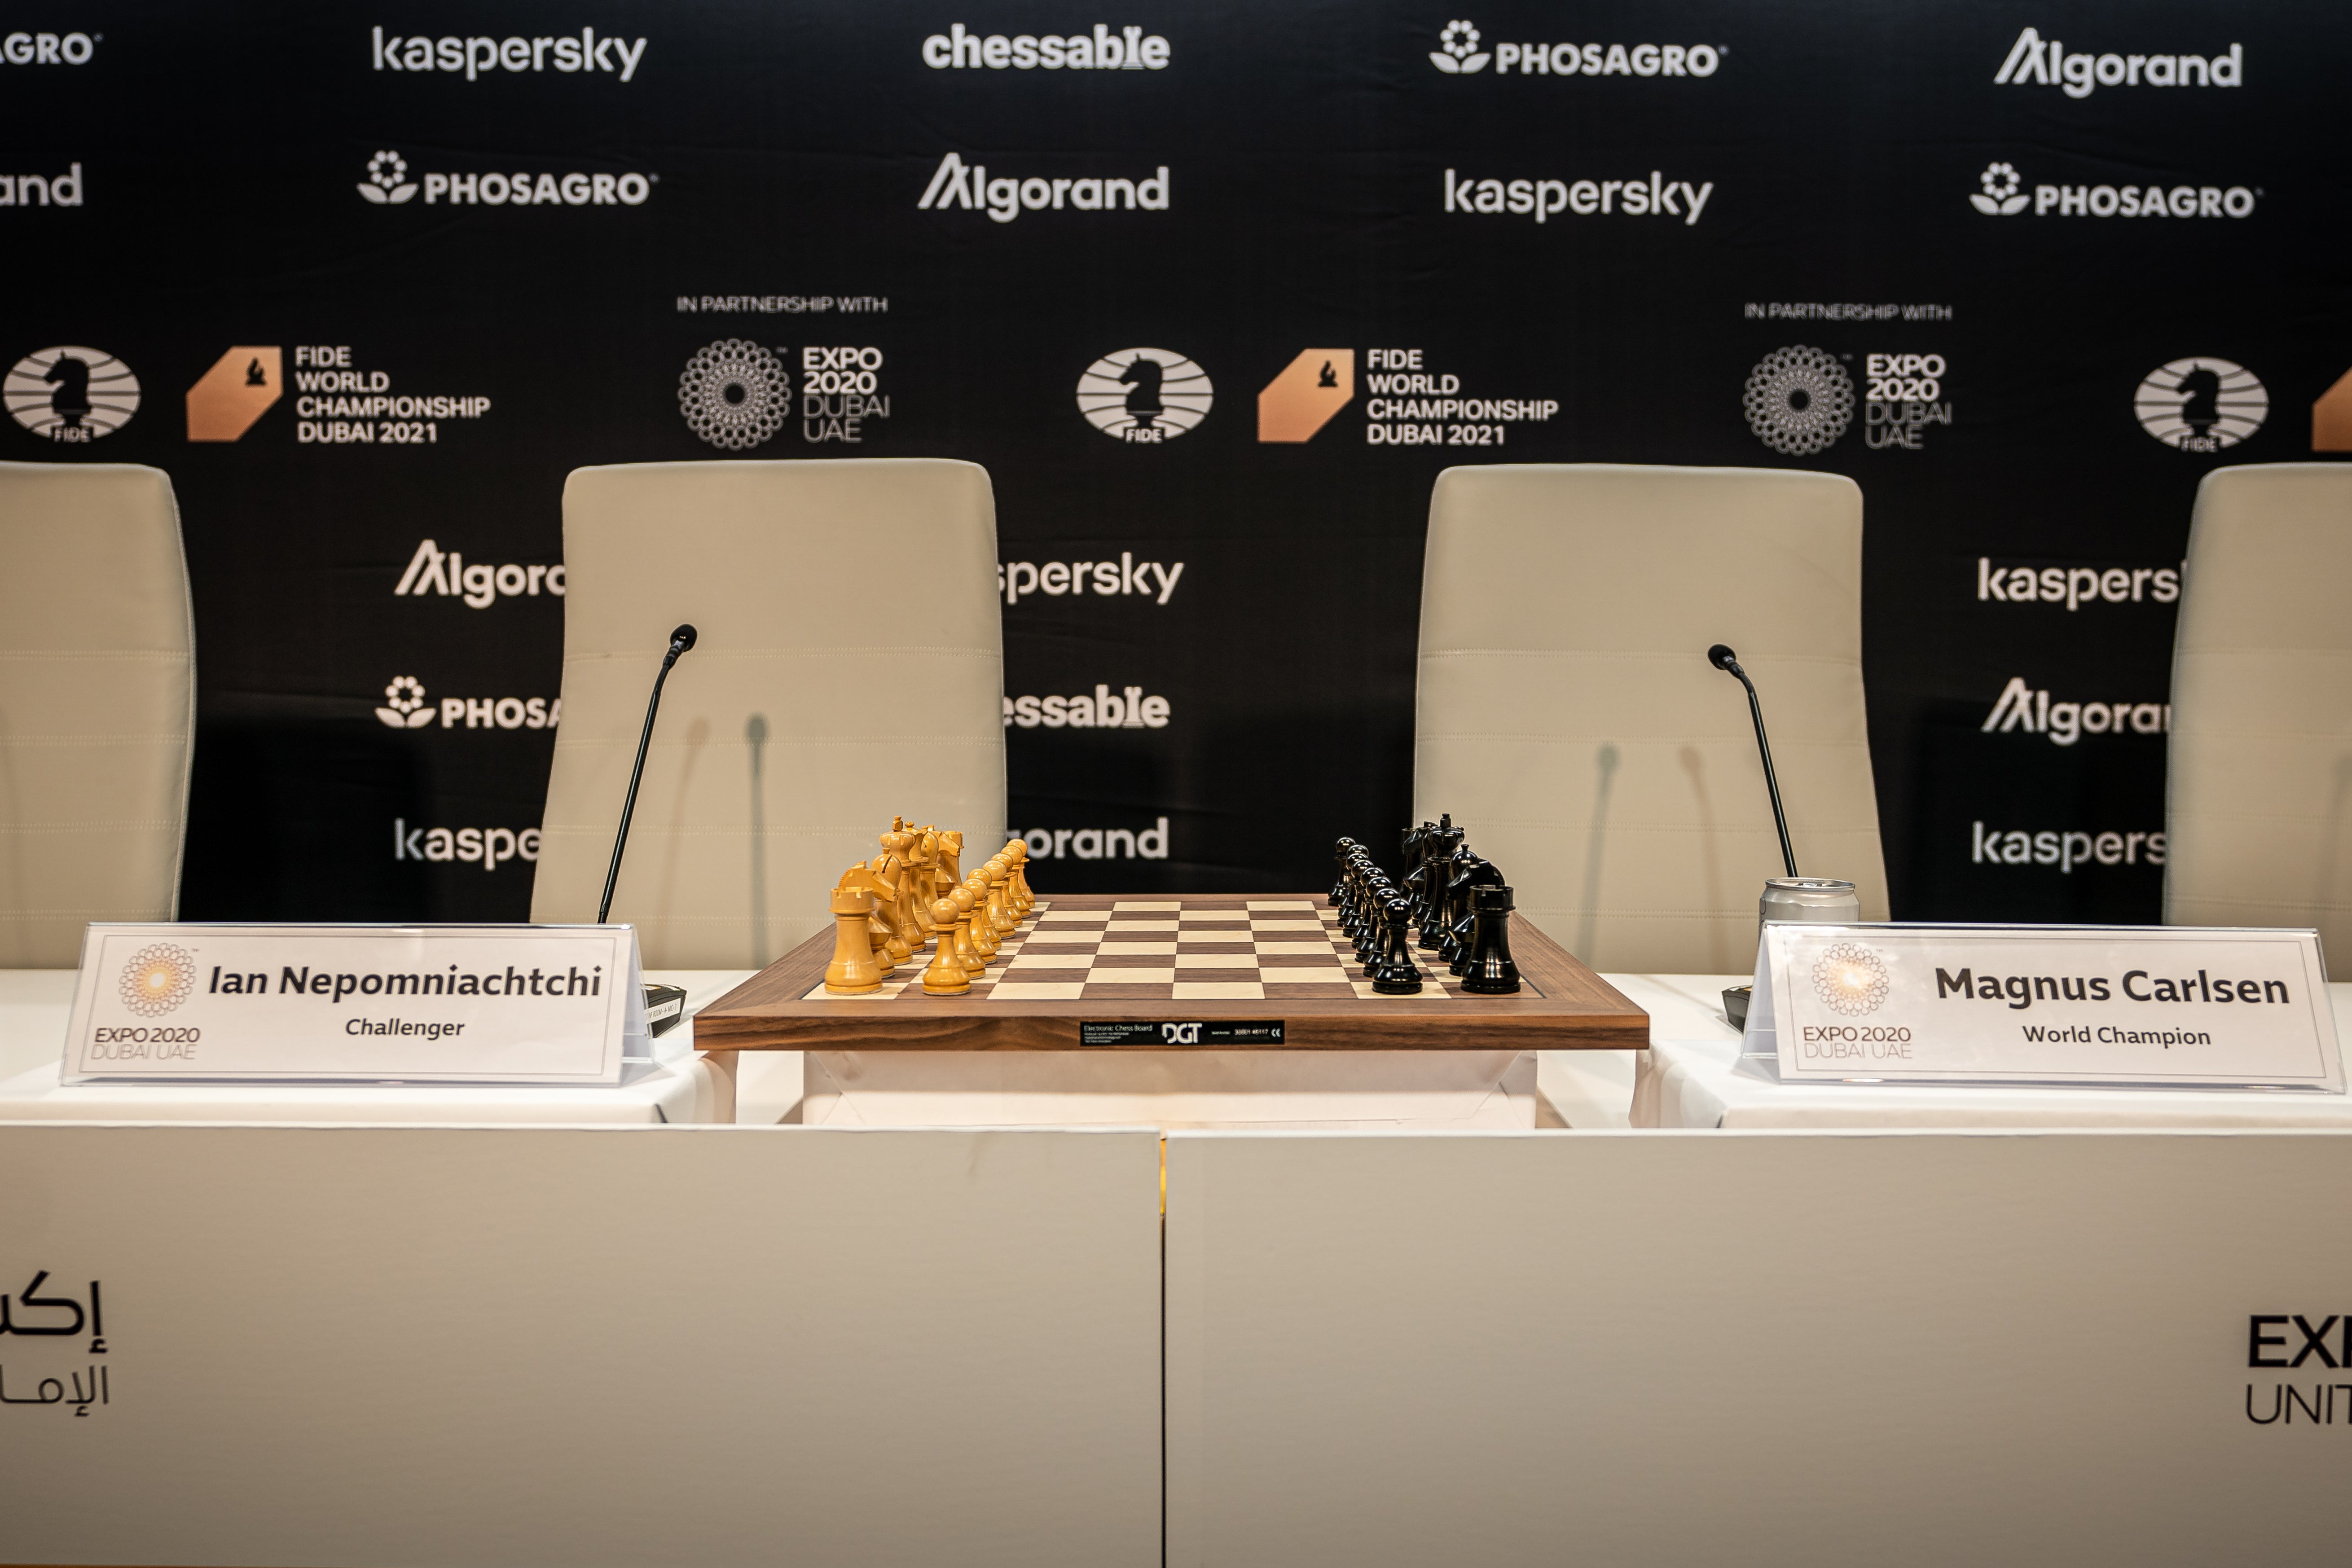 Another tight draw as Carlsen and Nepomniachtchi battle for world title, World Chess Championship 2021